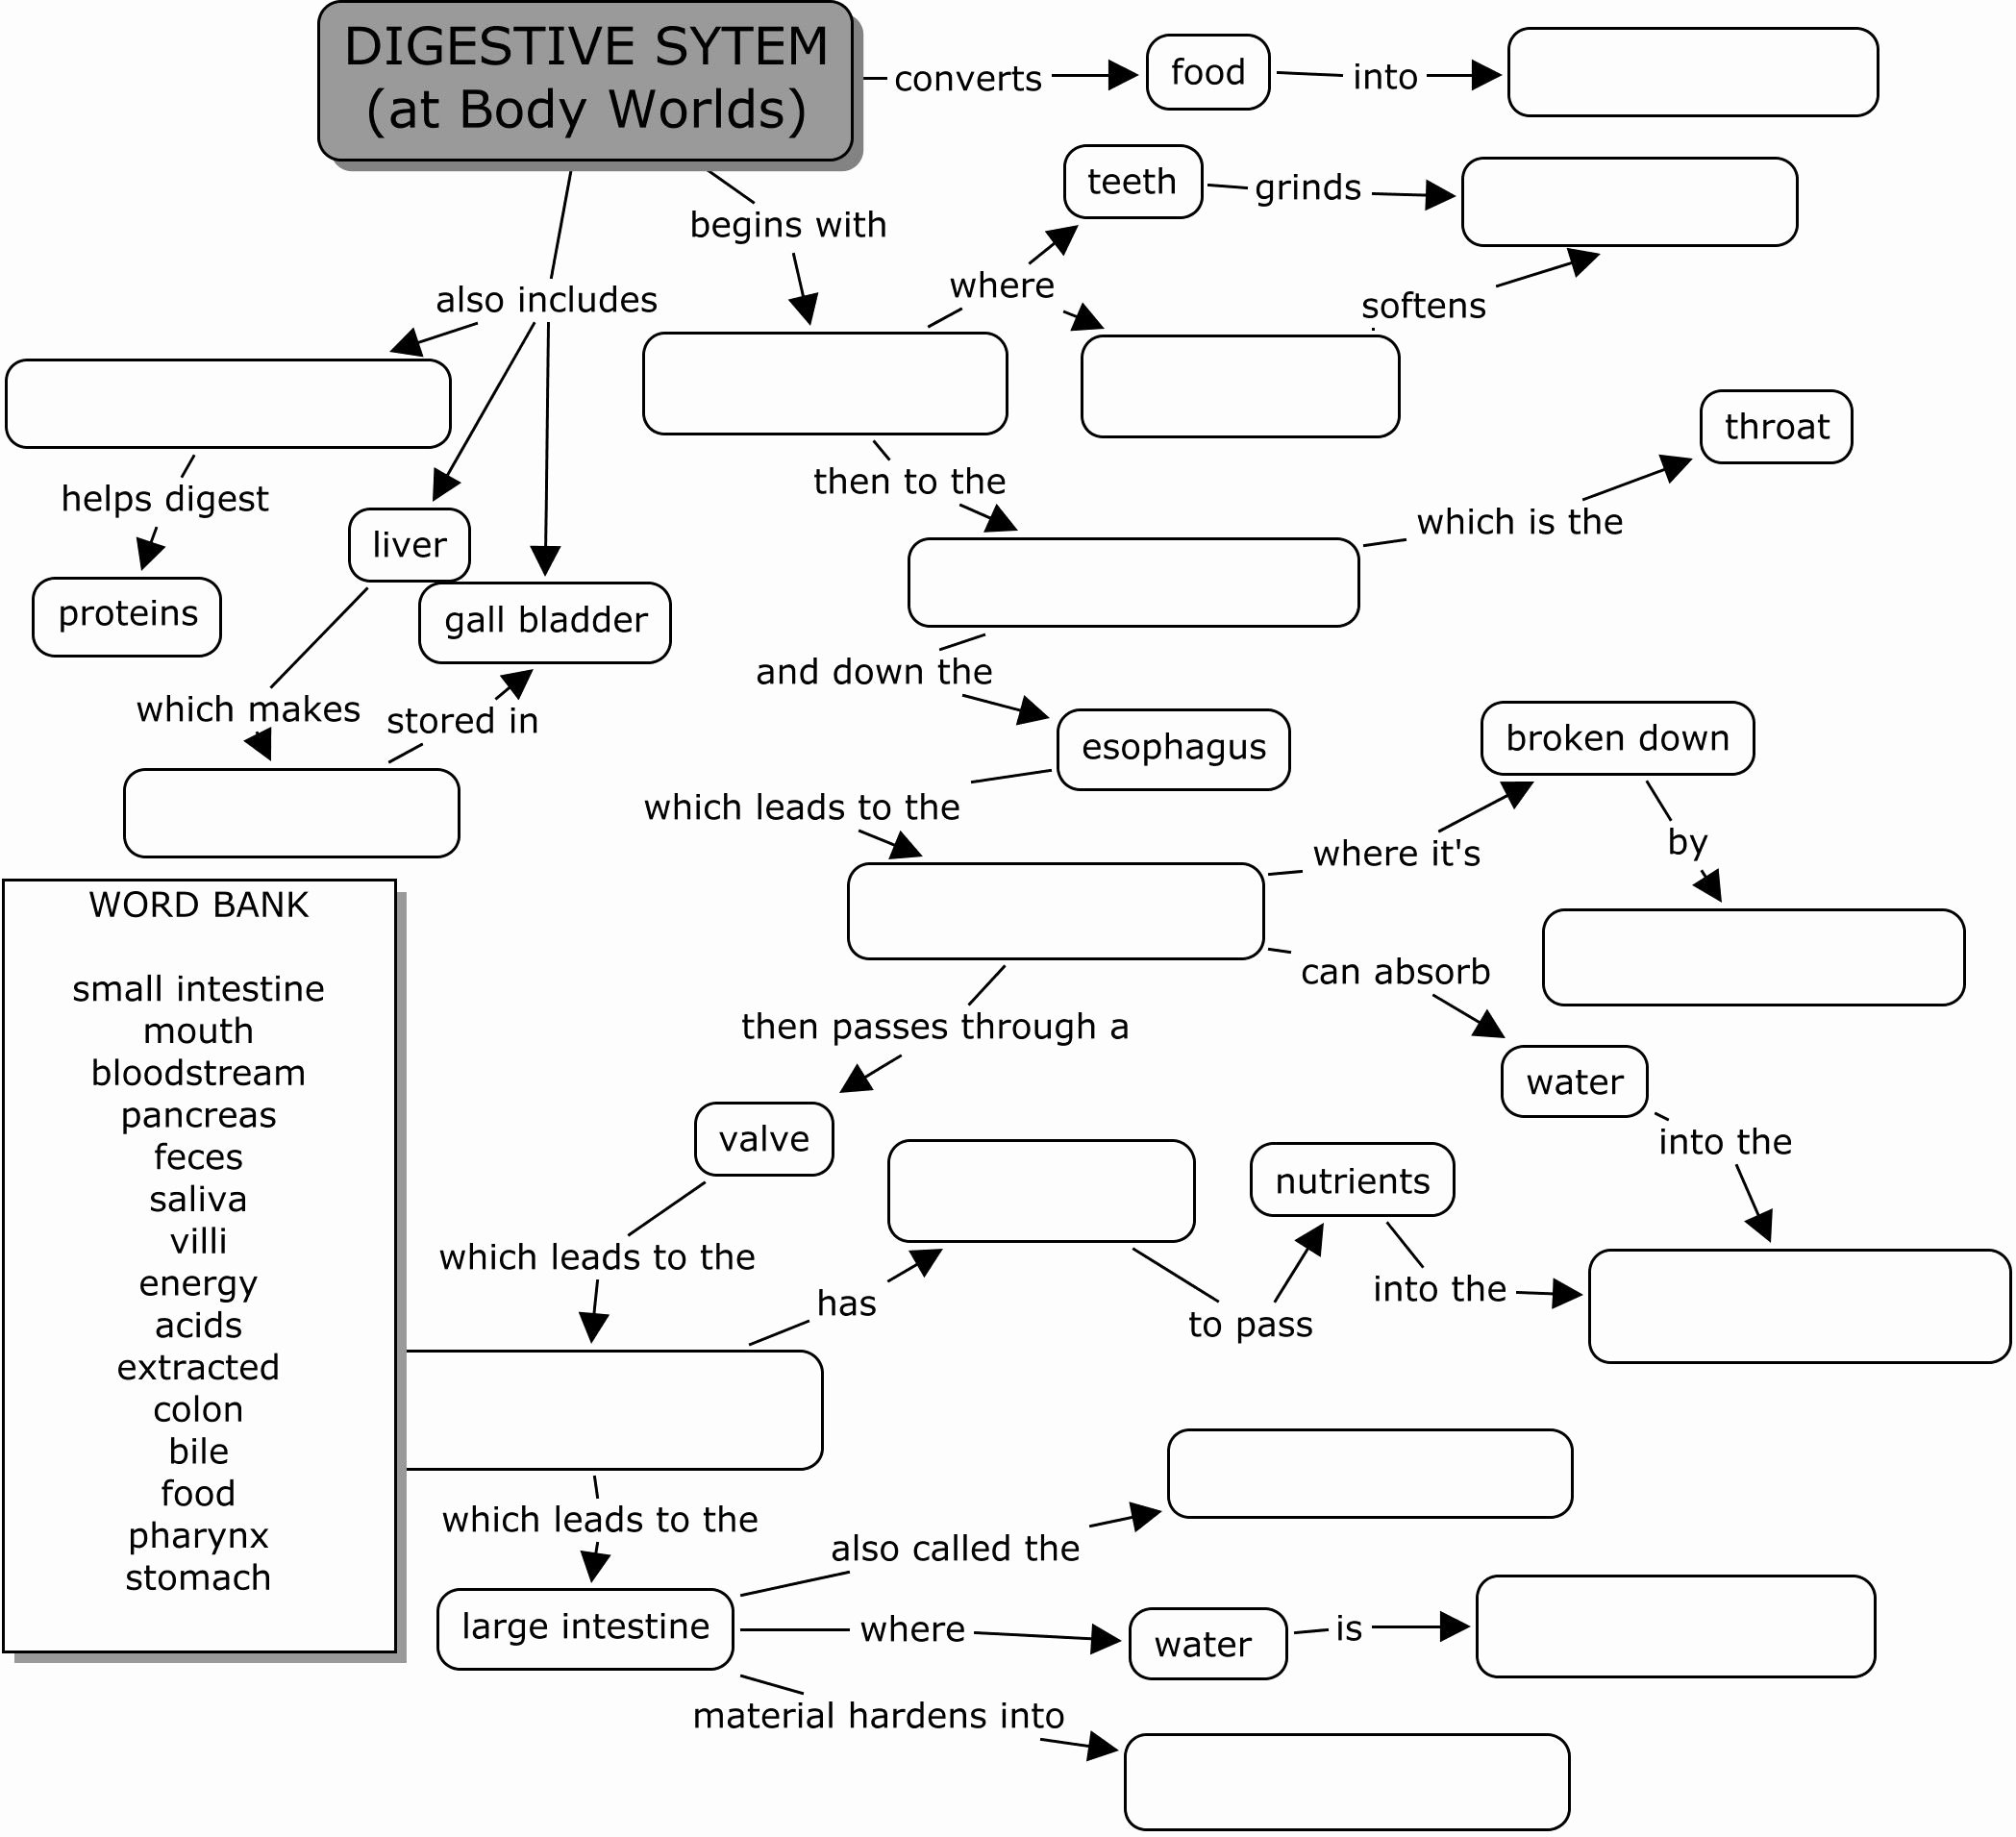 Digestive System Worksheet Answers Beautiful Body World Digestive System Science Class